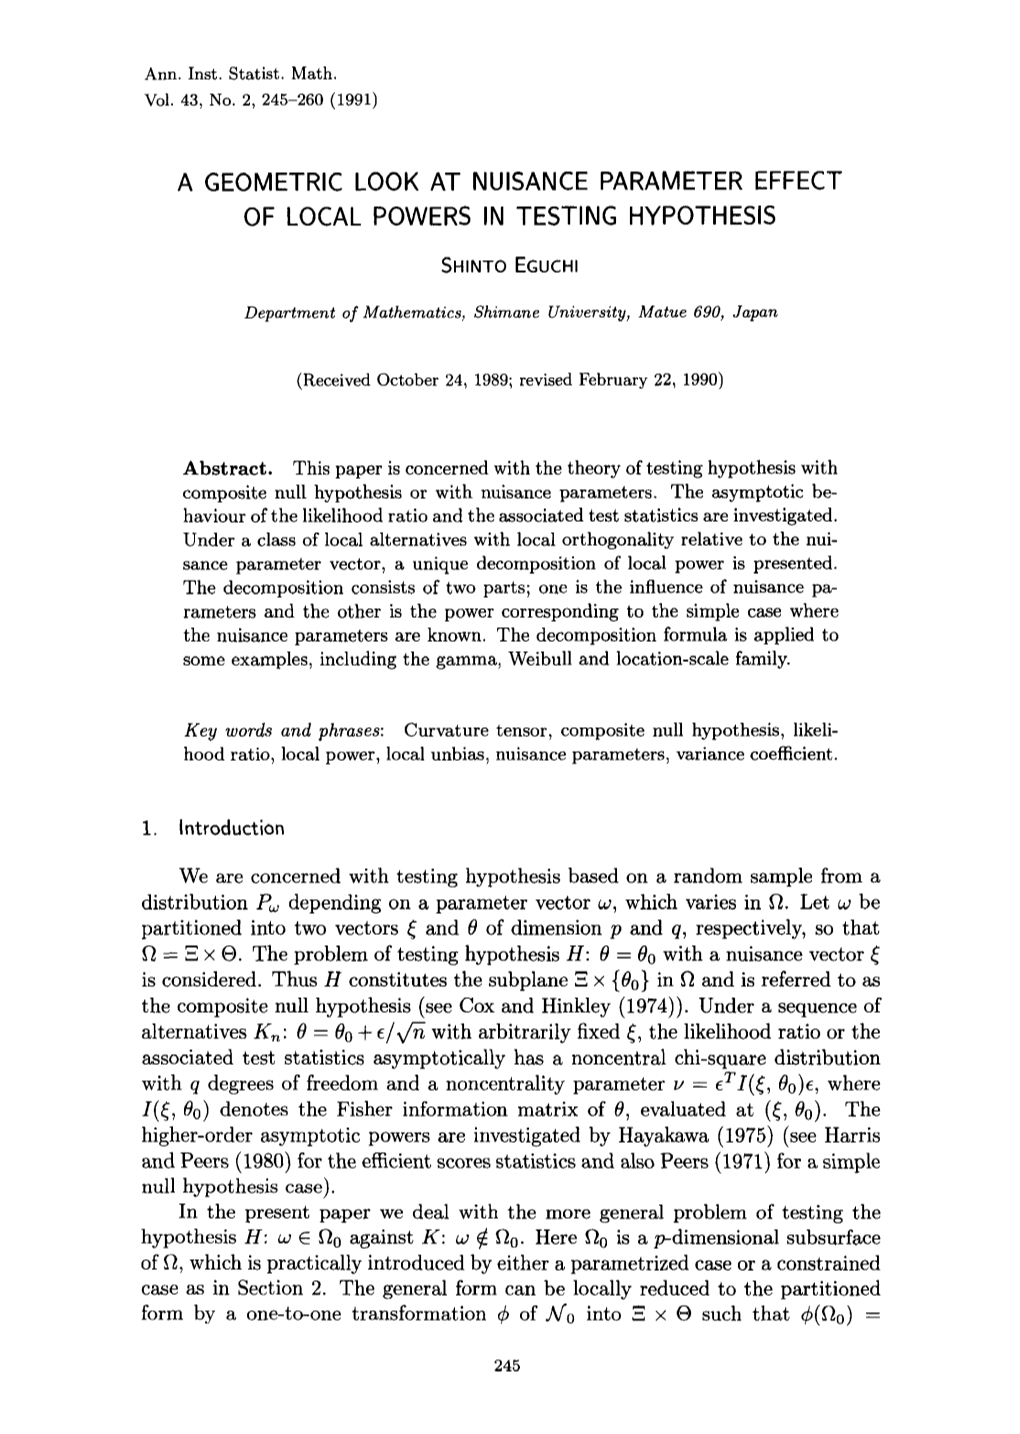 A Geometric Look at Nuisance Parameter Effect of Local Powers in Testing Hypothesis